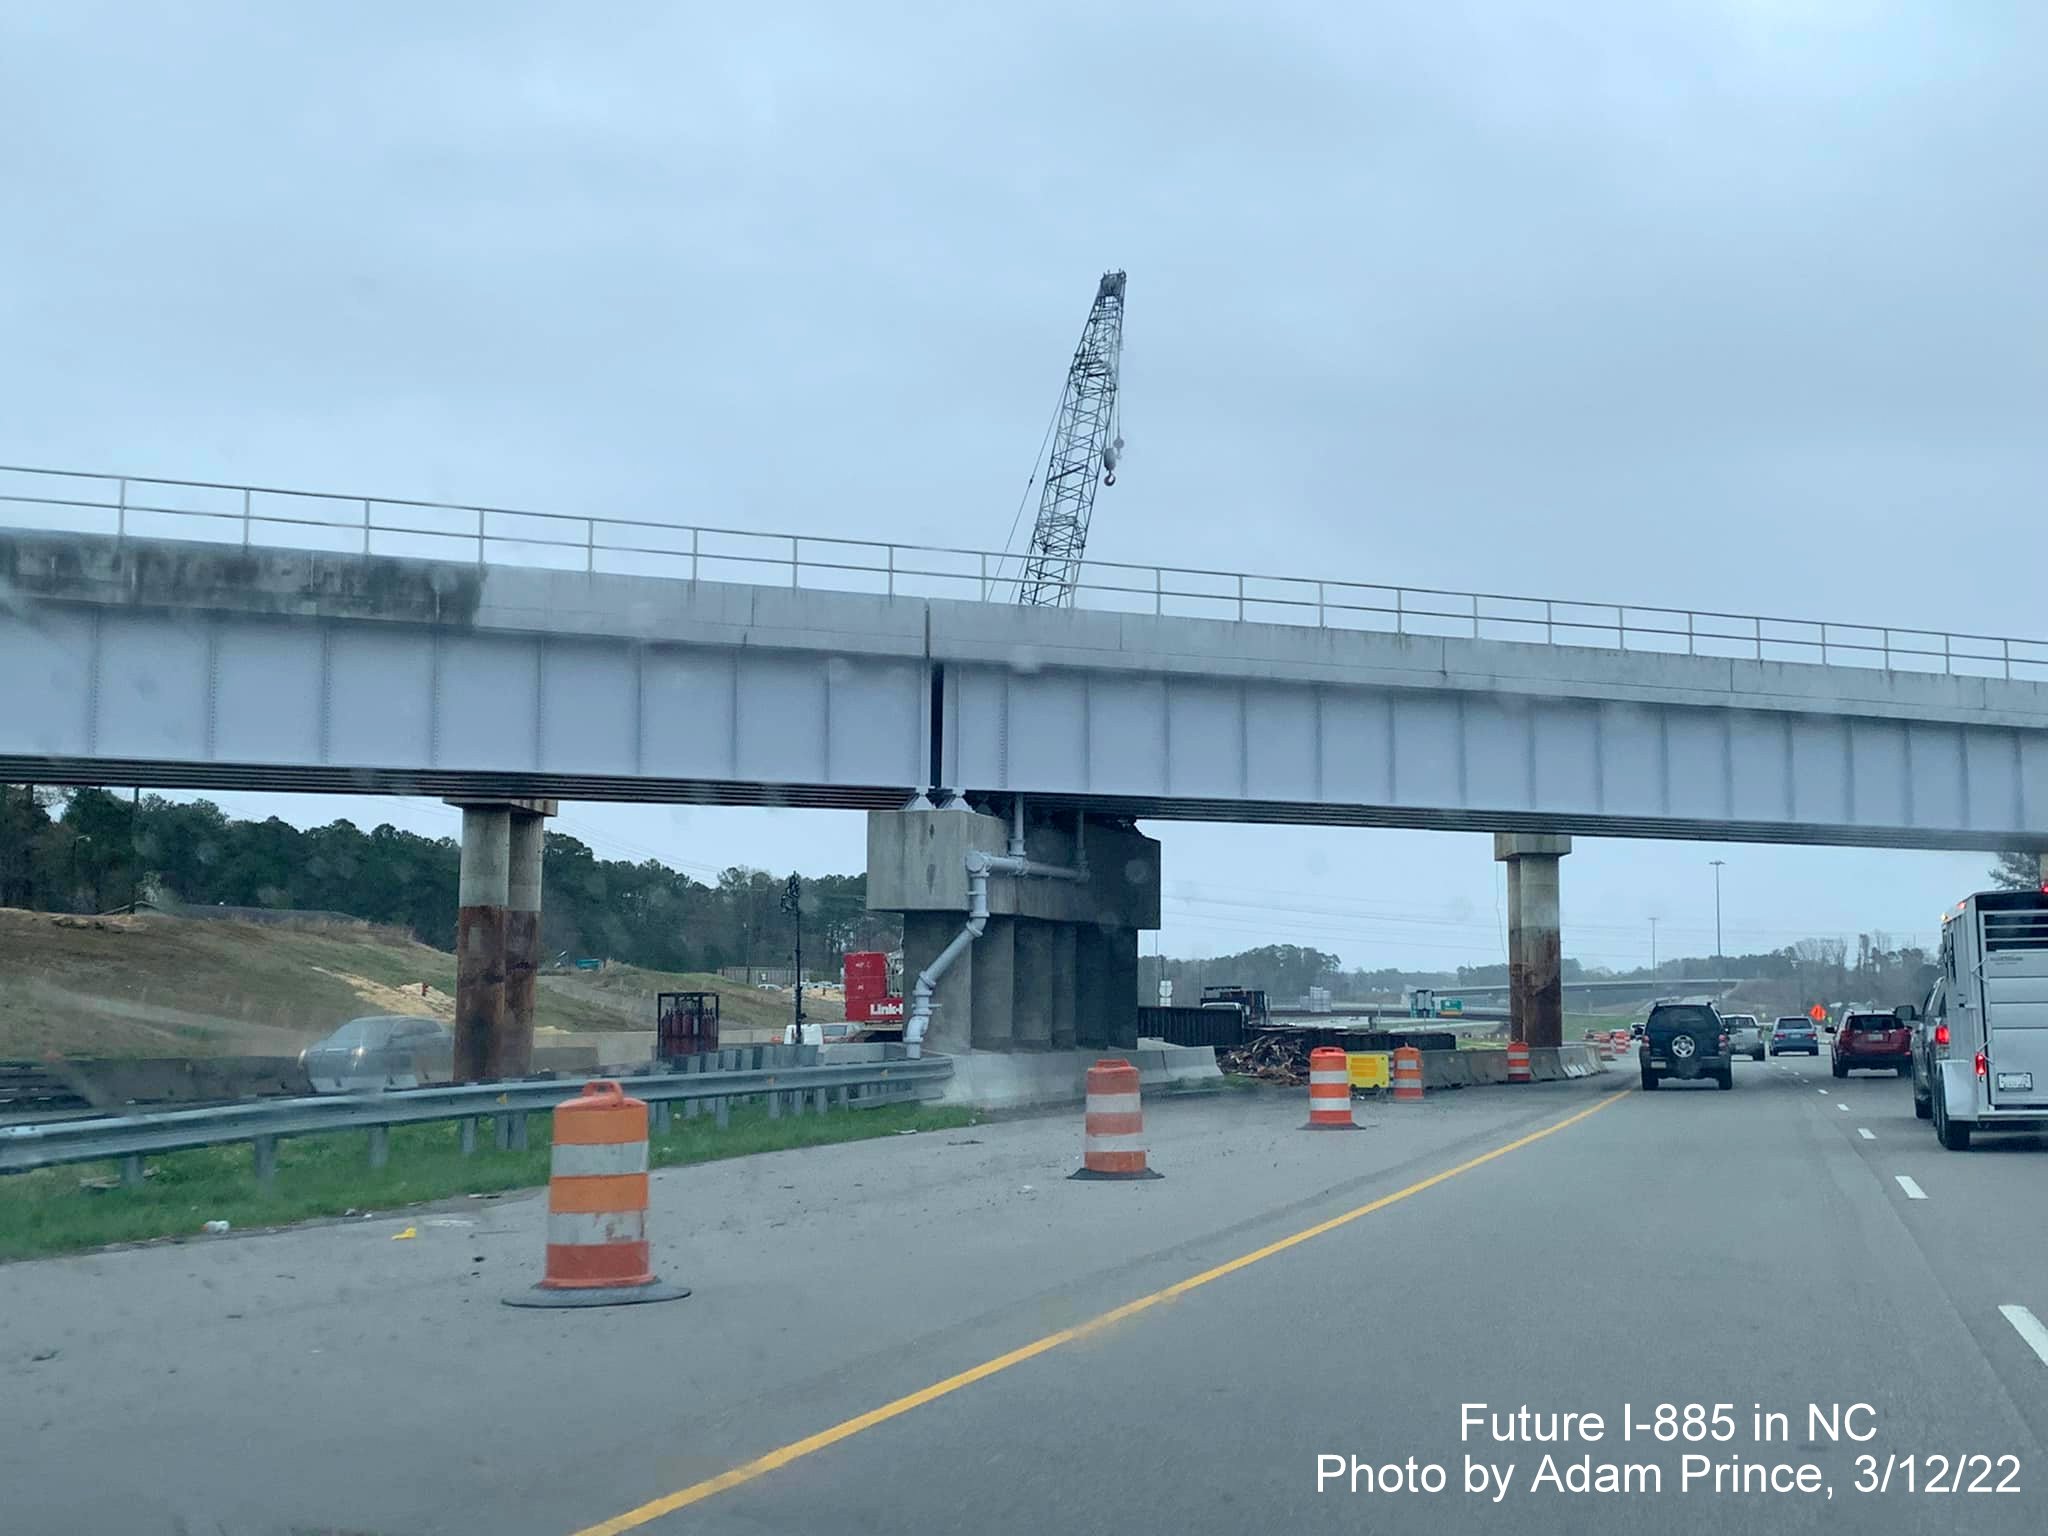 Image of railroad bridge demolition over US 70 (Future I-885) in Durham prior to East End Connector exit, by Adam Prince, March 2022